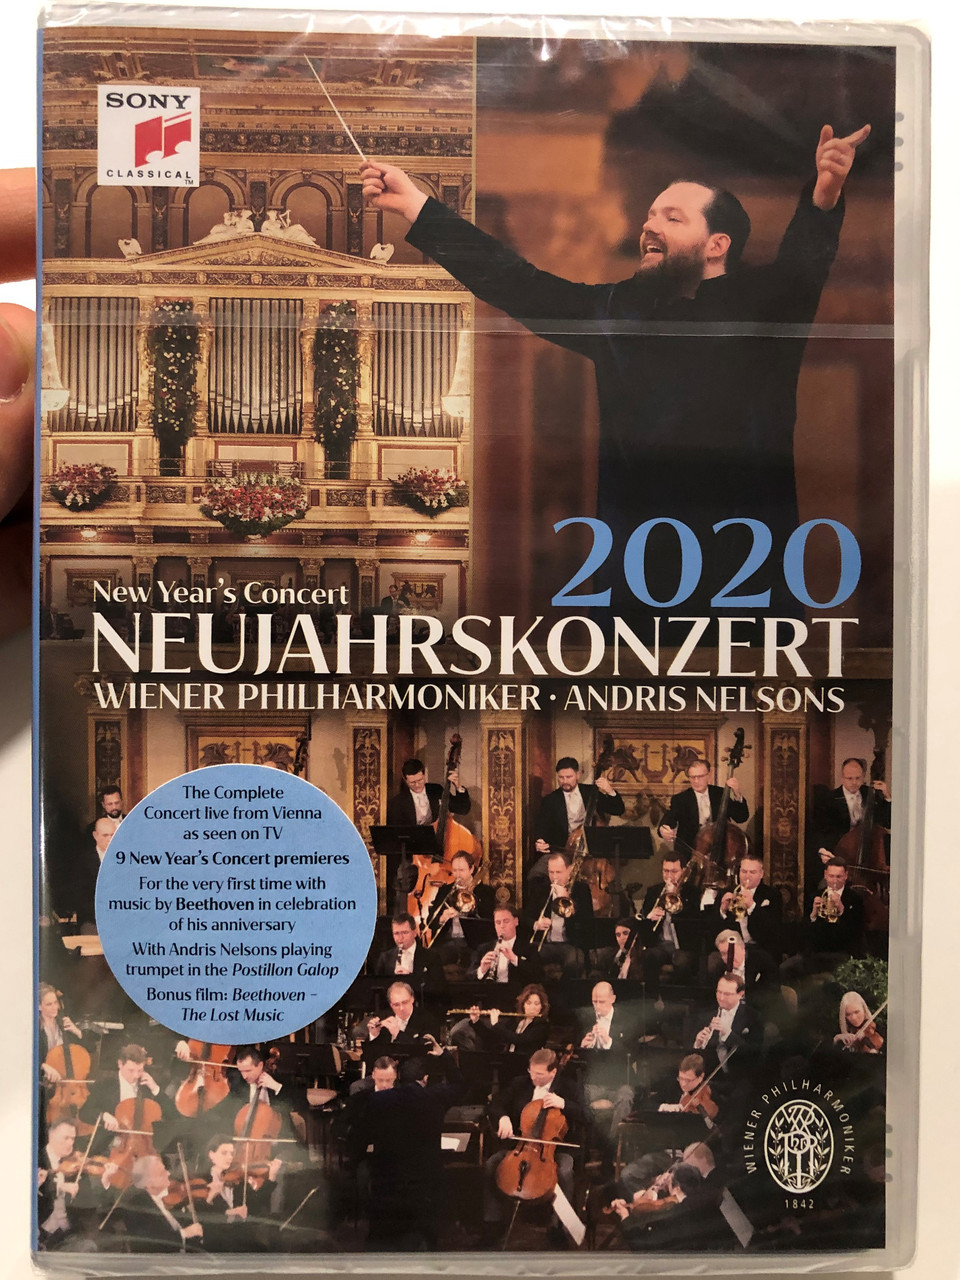 New Year's Concert DVD 2020 Neujahrskonzert / Directed by Michael Beyer /  Recorded Live 2020 on January 1 / Andris Nelsons conducting / Wiener  Philharmoniker, Sony Classical - bibleinmylanguage